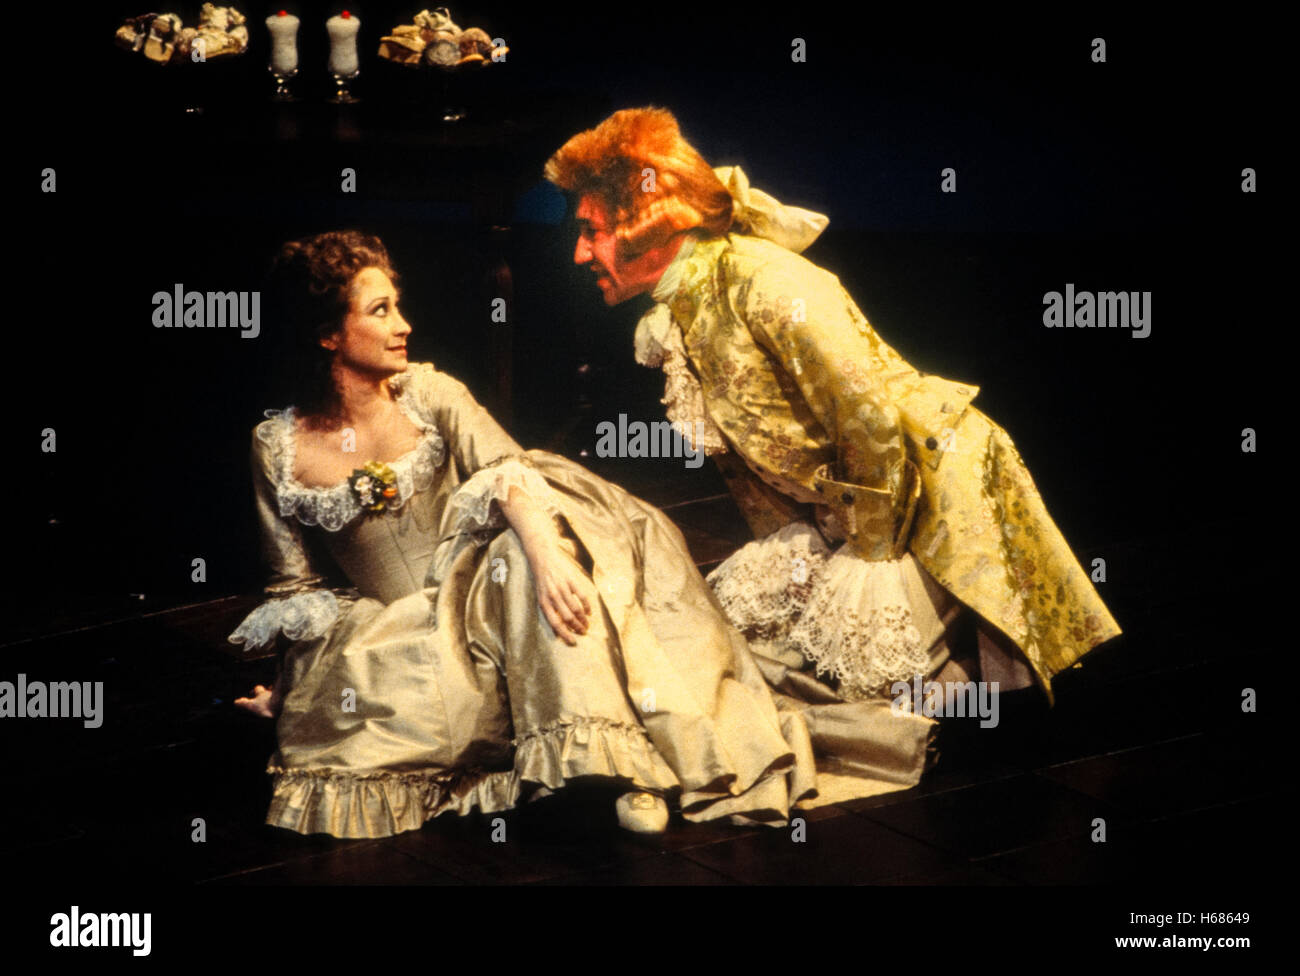 Simon Callow as Mozart and Felicity Kendal as Constanze in Peter Hall's original 1979 production of Amadeus written by Peter Shaffer at the National Theatre Stock Photo